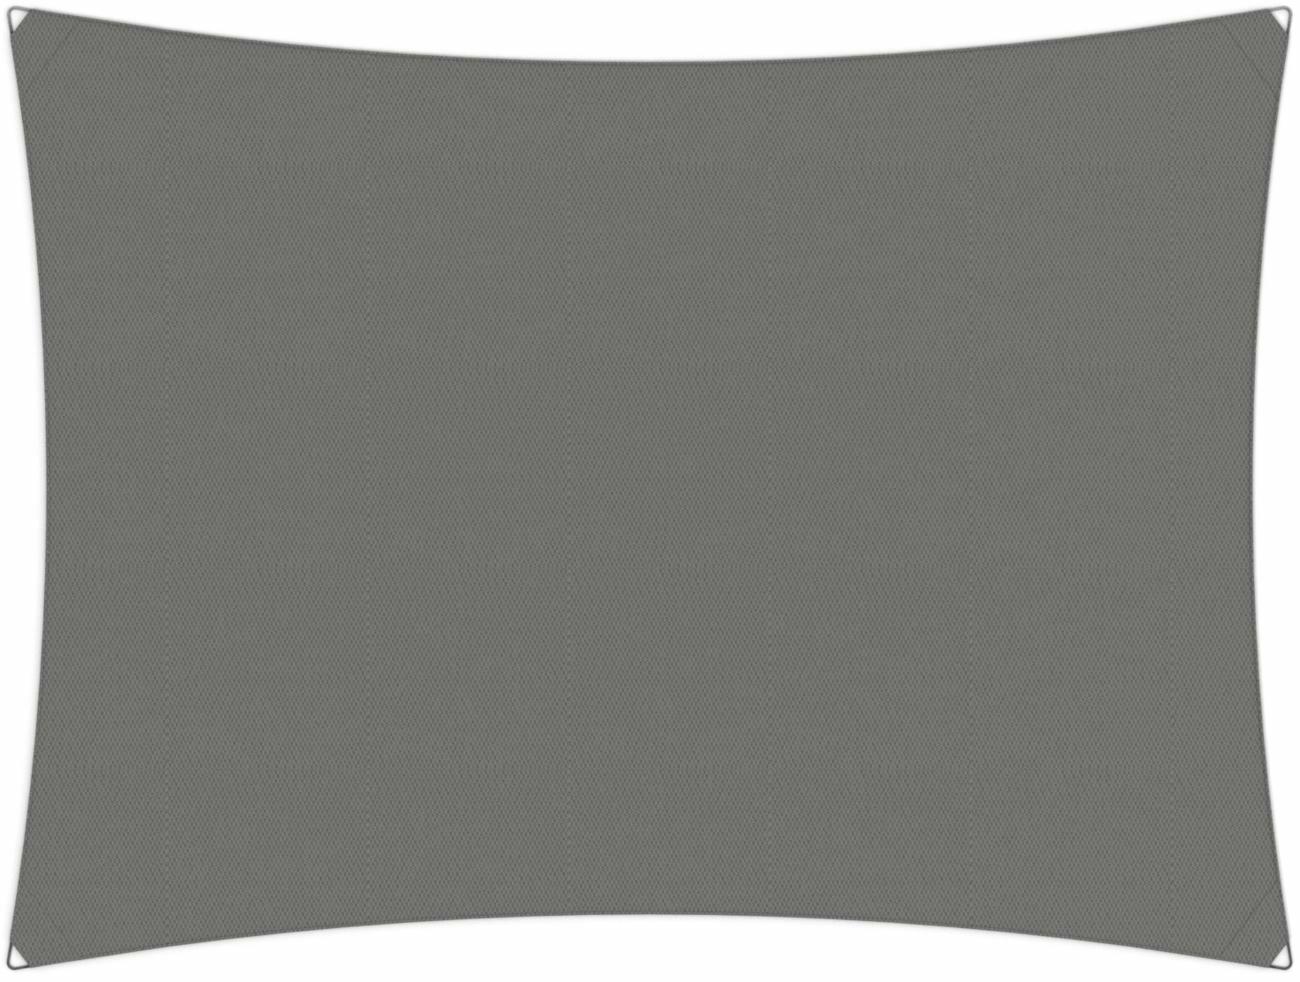 Ingenua shade sail Rectangle 4 x 3 m, for outdoor use. Colour of the fabric shade sail Grey.